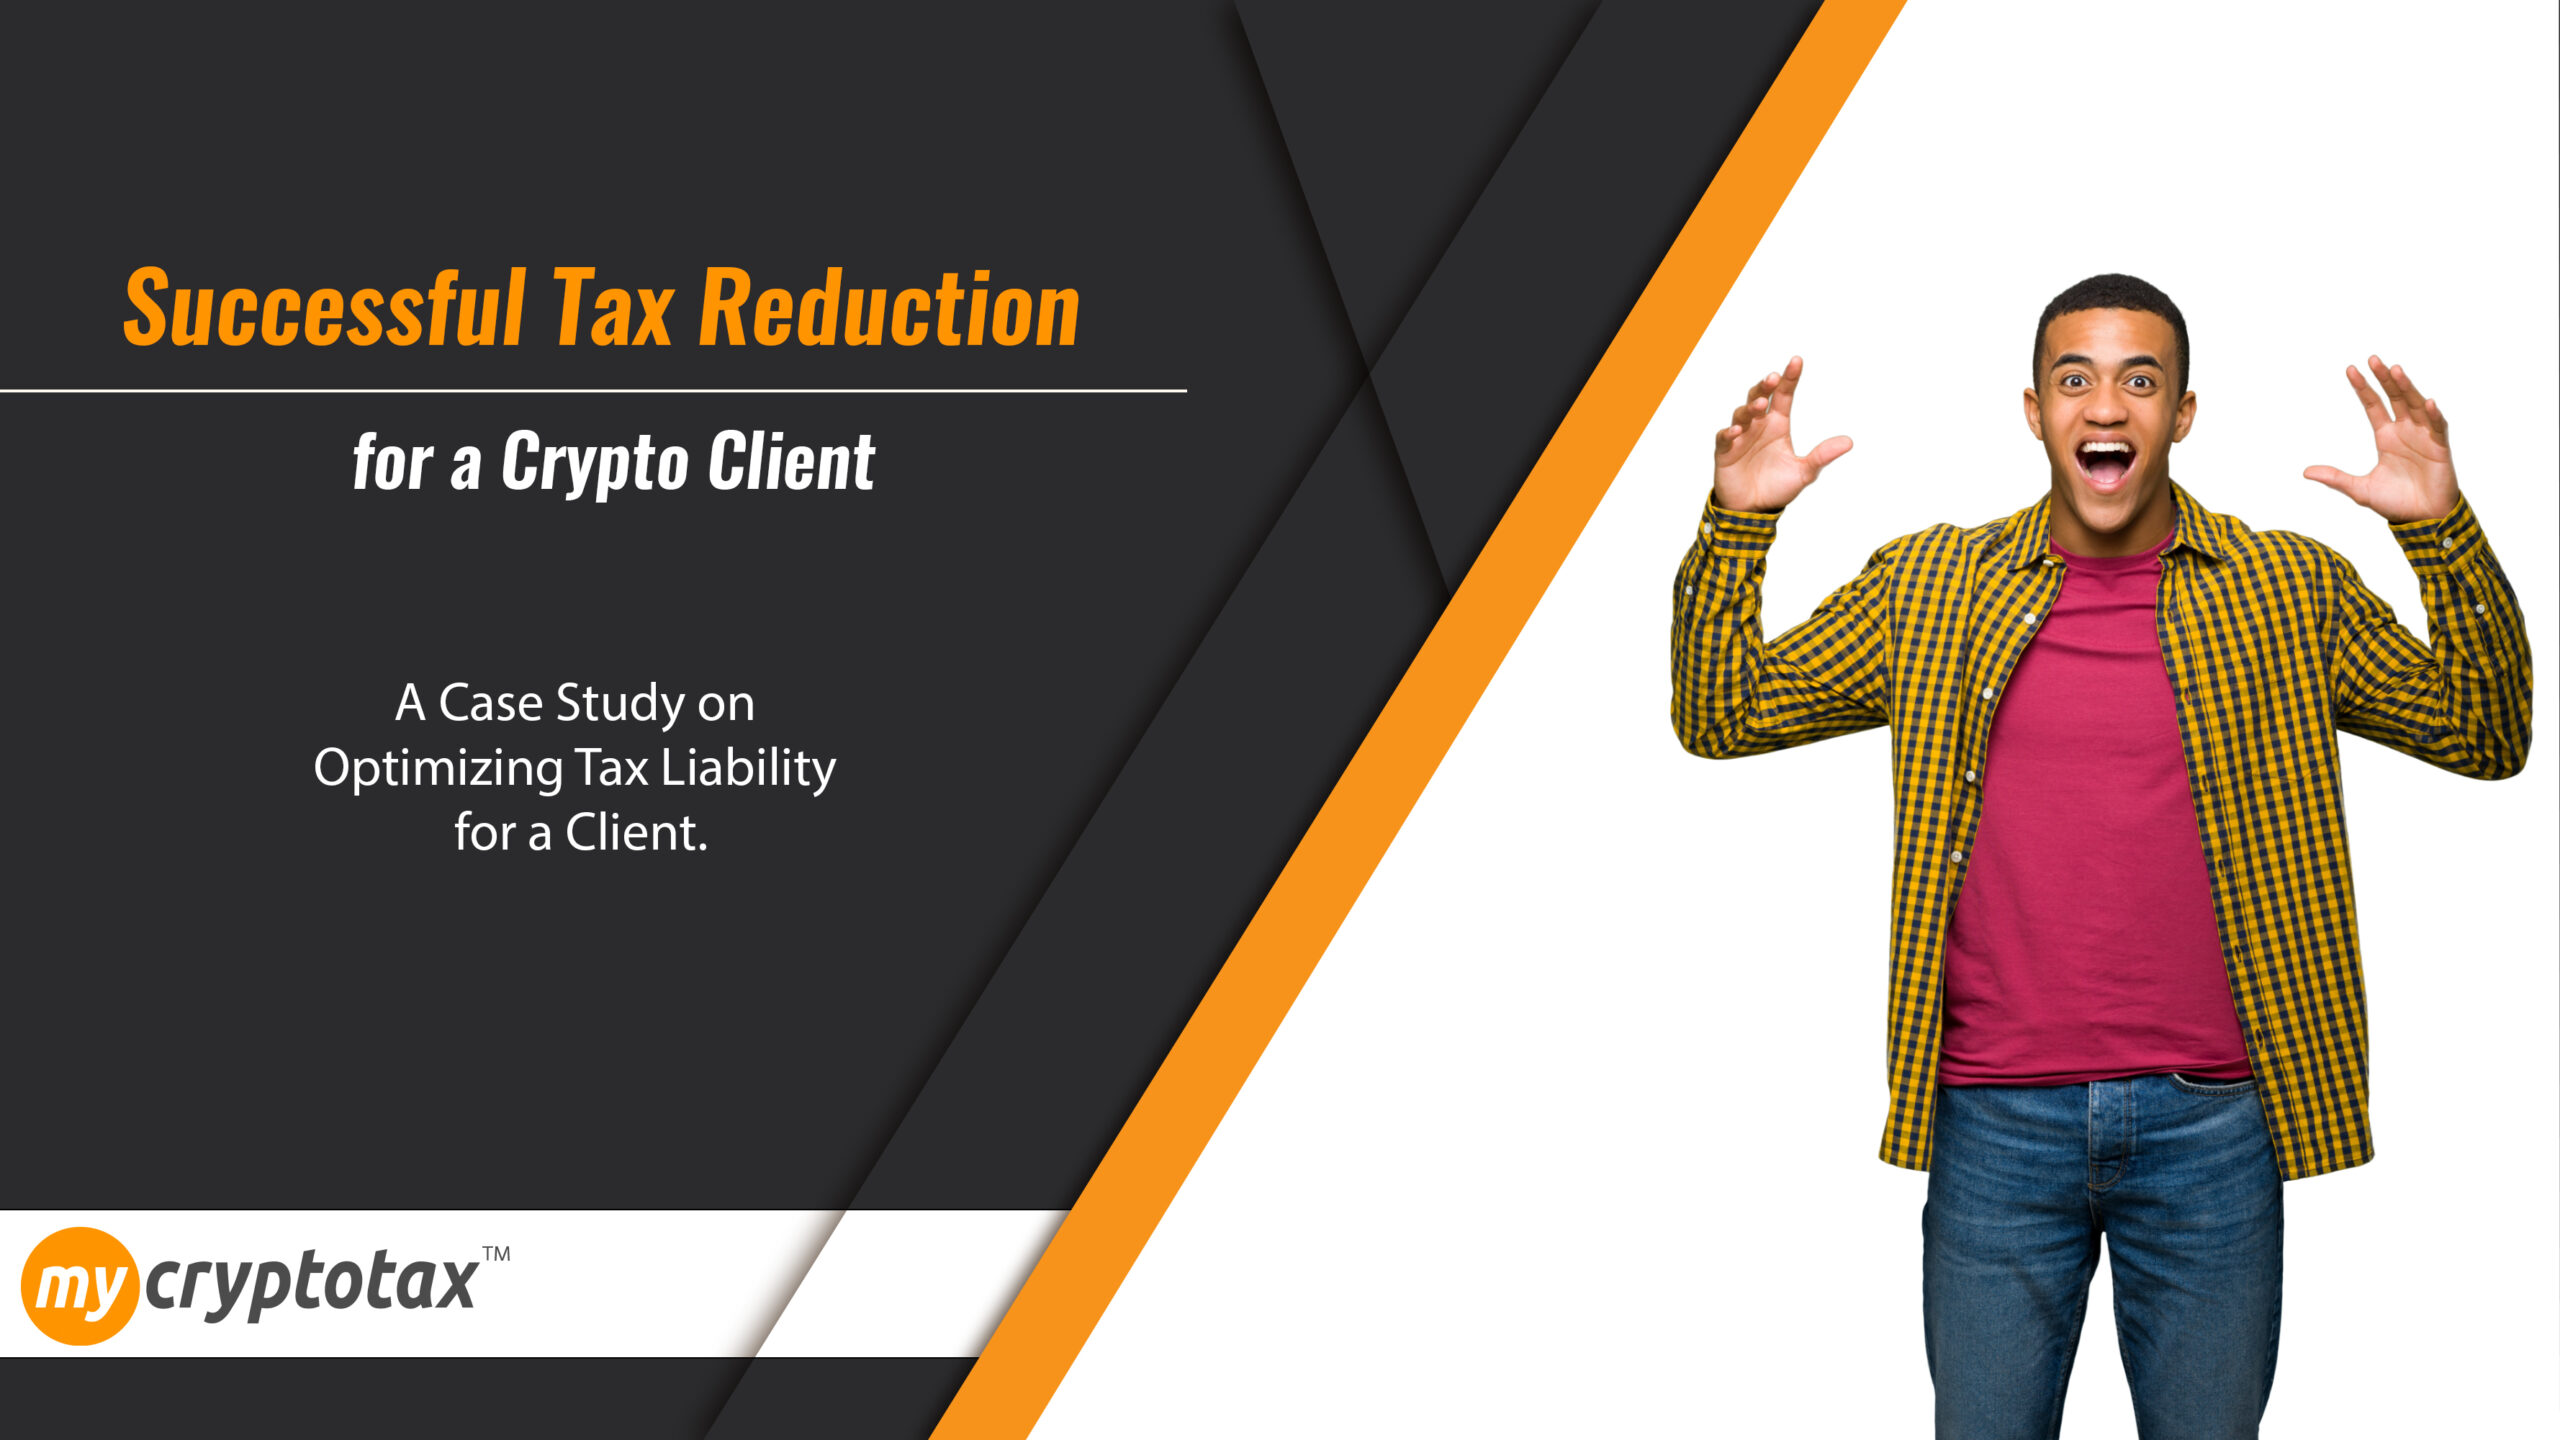 Crypto tax compliance, Cryptocurrency tax services, Bitcoin tax specialists, Ethereum tax advisors, Crypto tax consultants, Tax implications of Cryptocurrency, Crypto accounting experts, Cryptocurrency tax reporting, Cryptocurrency tax optimization, Crypto tax advice London, Cryptocurrency tax experts in the UK, Crypto tax return assistance, Cryptocurrency capital gains tax, Cryptocurrency accountants, Cryptocurrency accountants near me, Cryptocurrency tax advisor uk, Cryptocurrency tax investigation, Cryptocurrency tax planning, Crypto tax planning and optimization, Crypto tax return preparation, Crypto accounting for businesses, Crypto tax reporting requirements, Crypto tax relief in the UK, Cryptocurrency tax implications for traders, Crypto tax services for investors, Crypto tax consultancy London, Cryptocurrency accounting and bookkeeping, Crypto tax experts for startups, Cryptocurrency tax FAQ, UK crypto tax advisory firm, Crypto tax advisory services